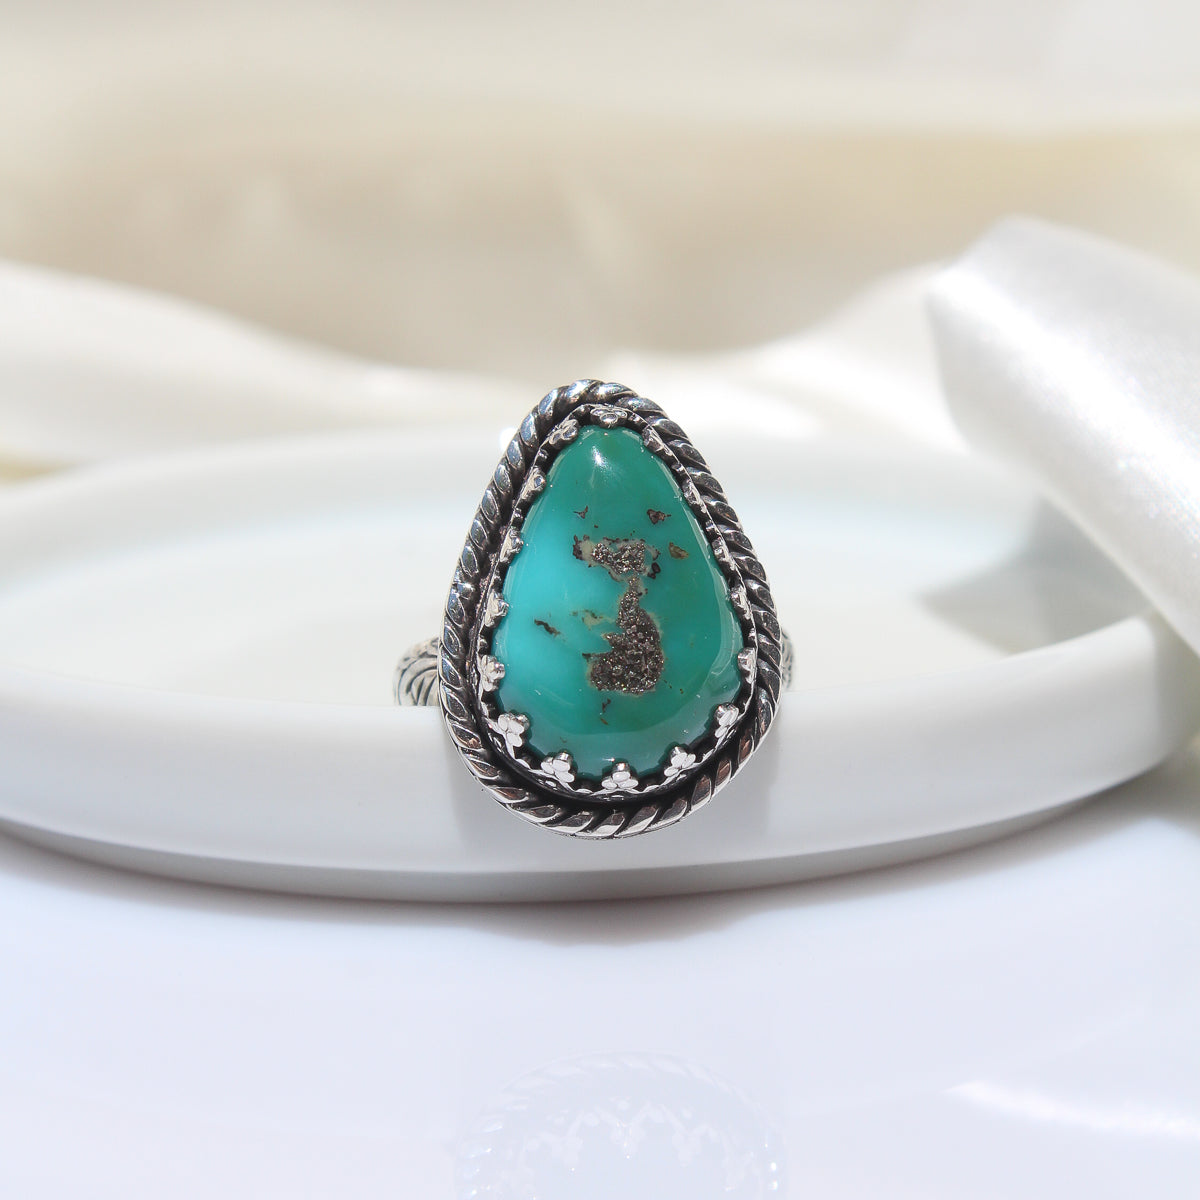 Kingman Turquoise with Pyrite Ring - Size 7.5